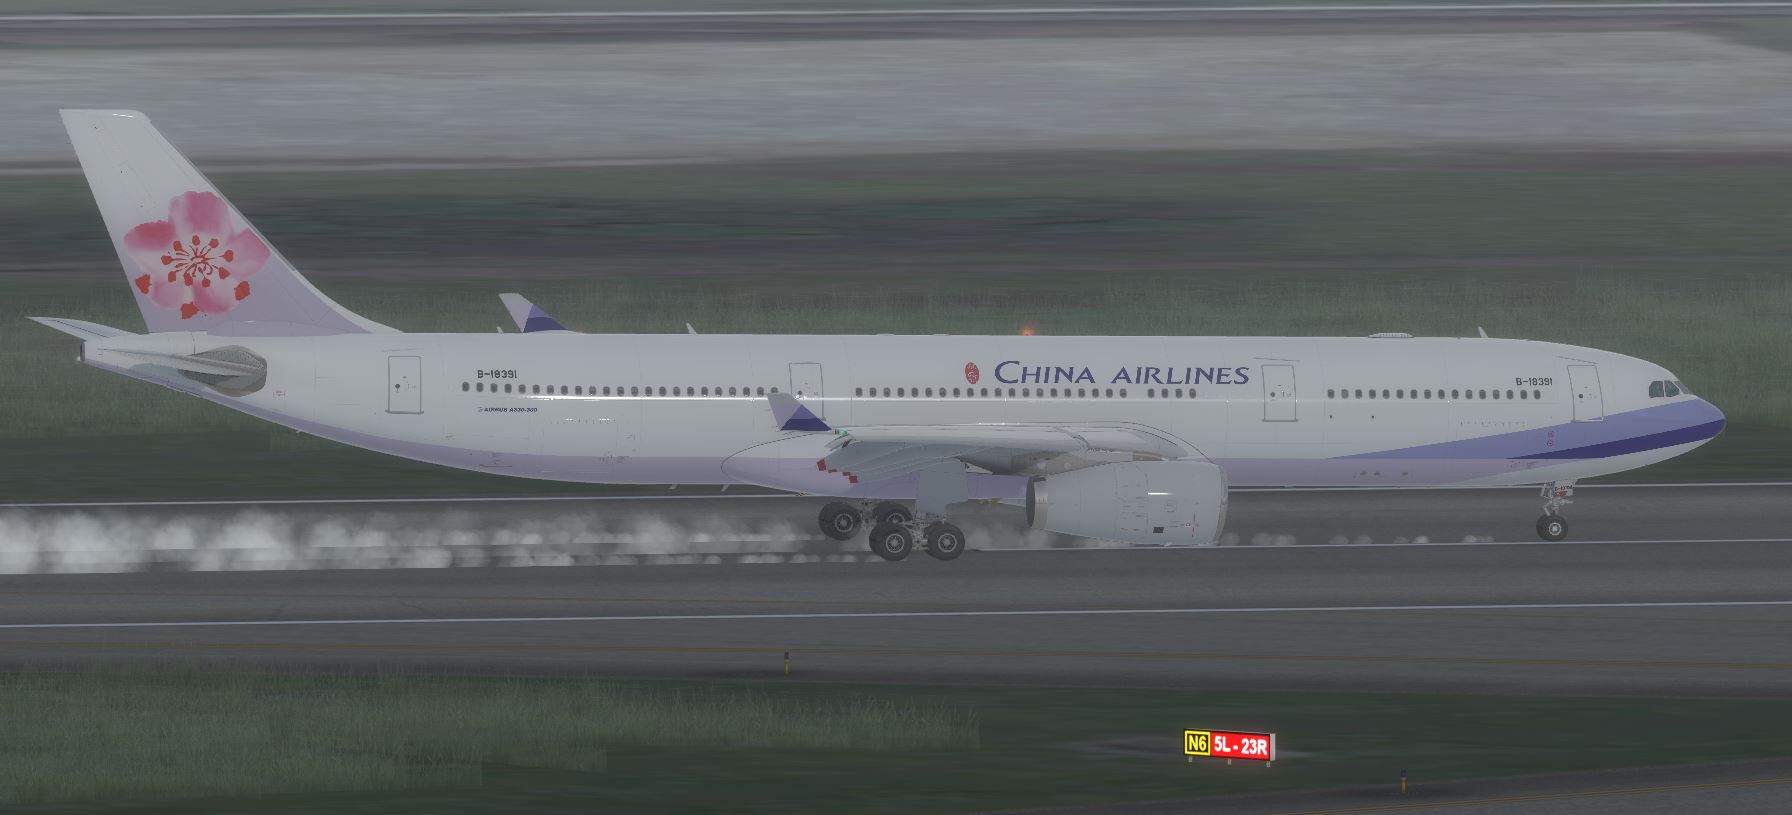 AS A330 ChinaAirline-2900 